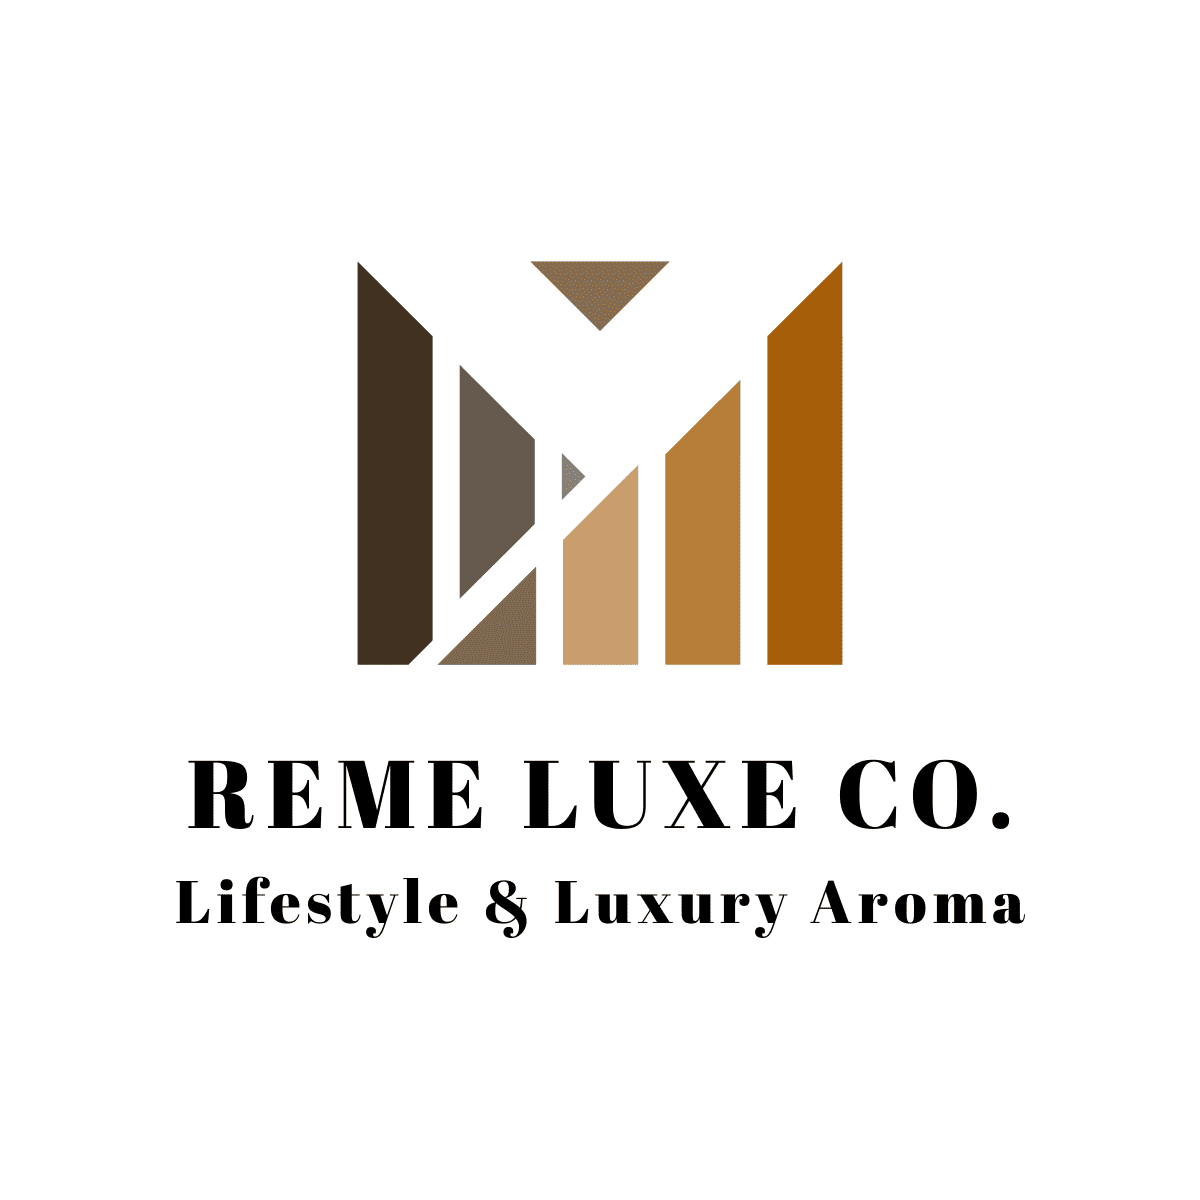 REME LUXE & CO.